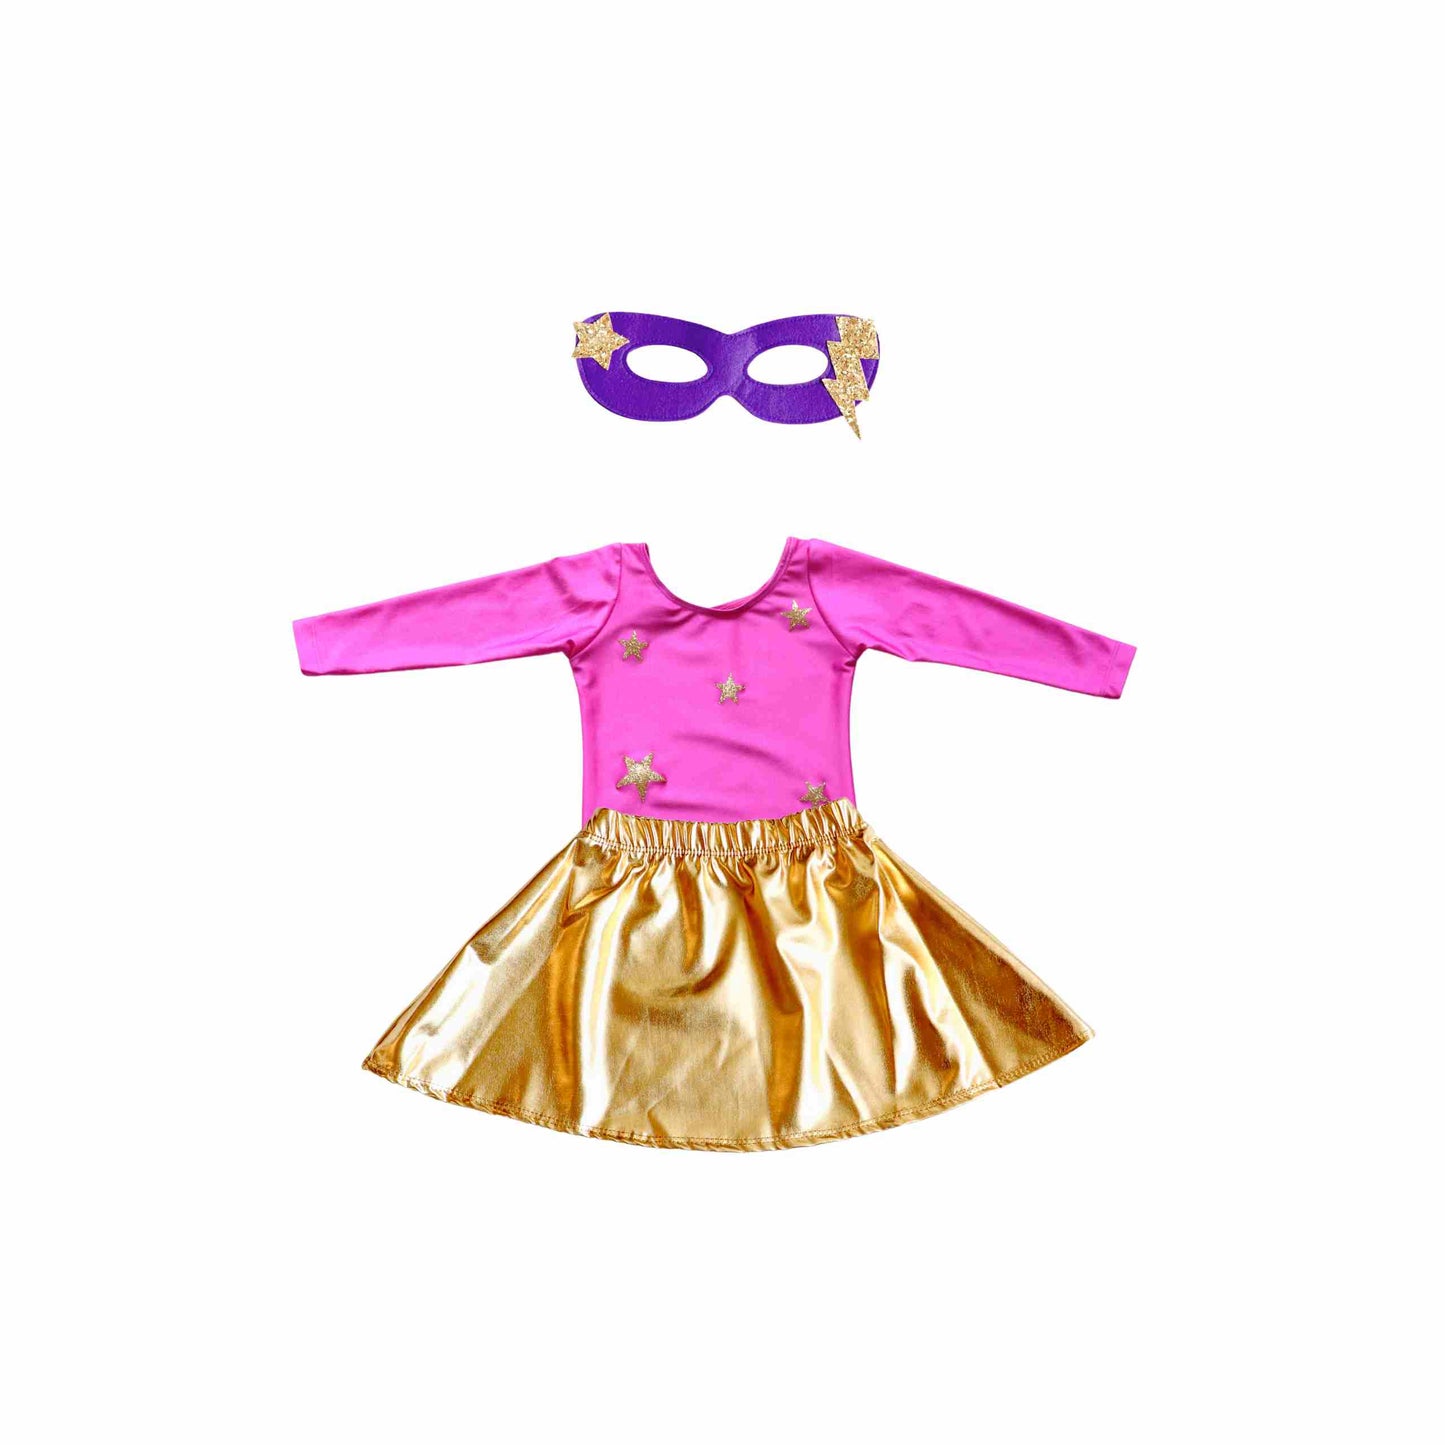 All Star Costume Set, Pink/Gold